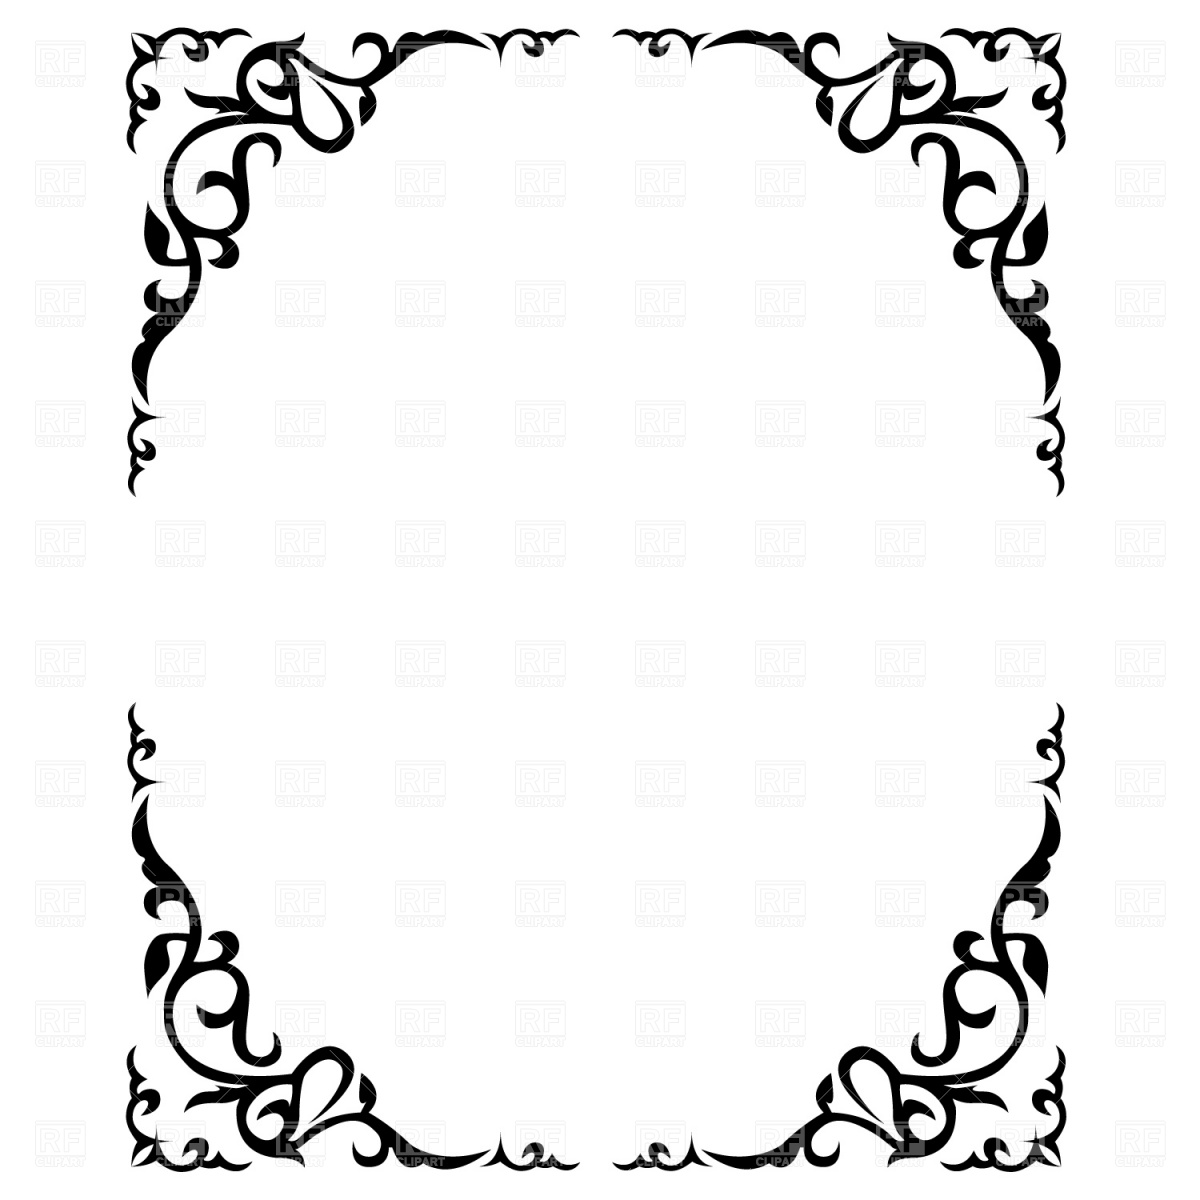 Ornate floral frame, Borders and Frames, download Royalty-free ...